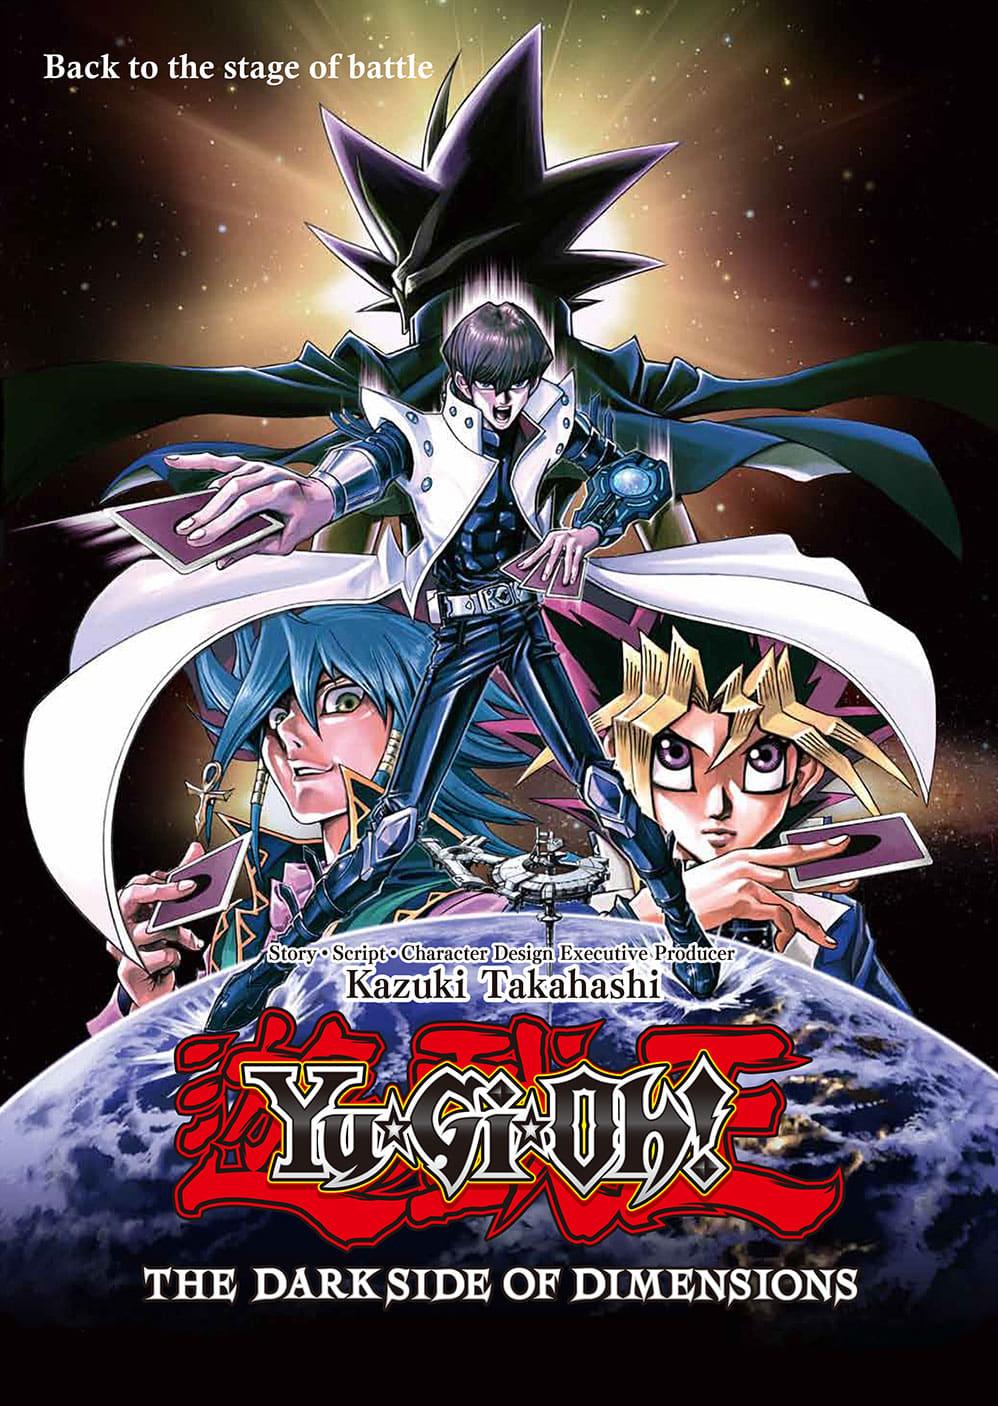 Yu-Gi-Oh!: The Dark Side of Dimensions poster